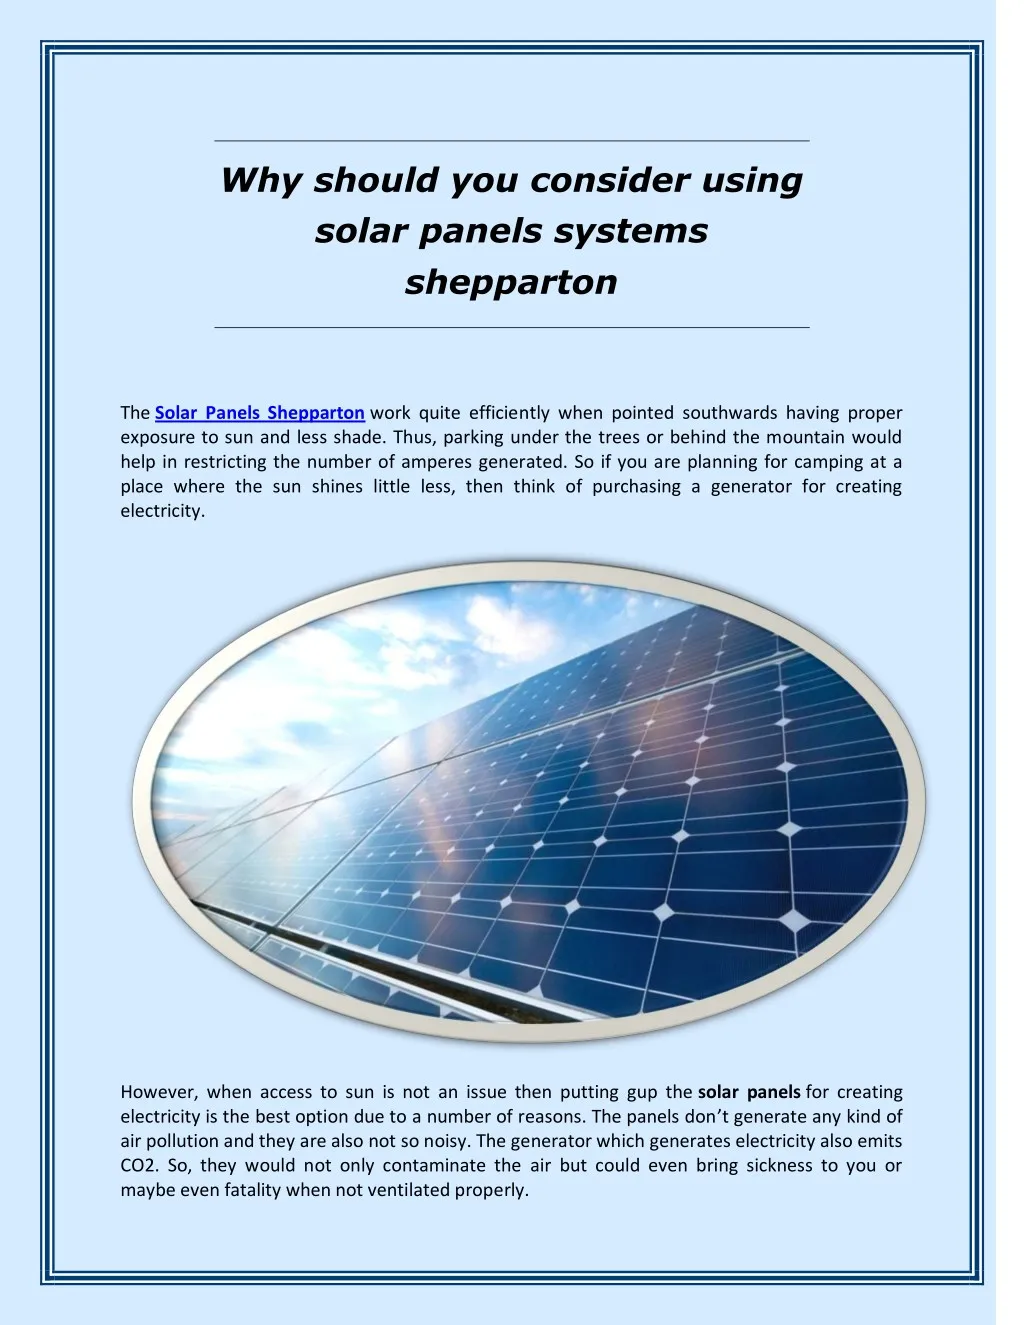 why should you consider using solar panels